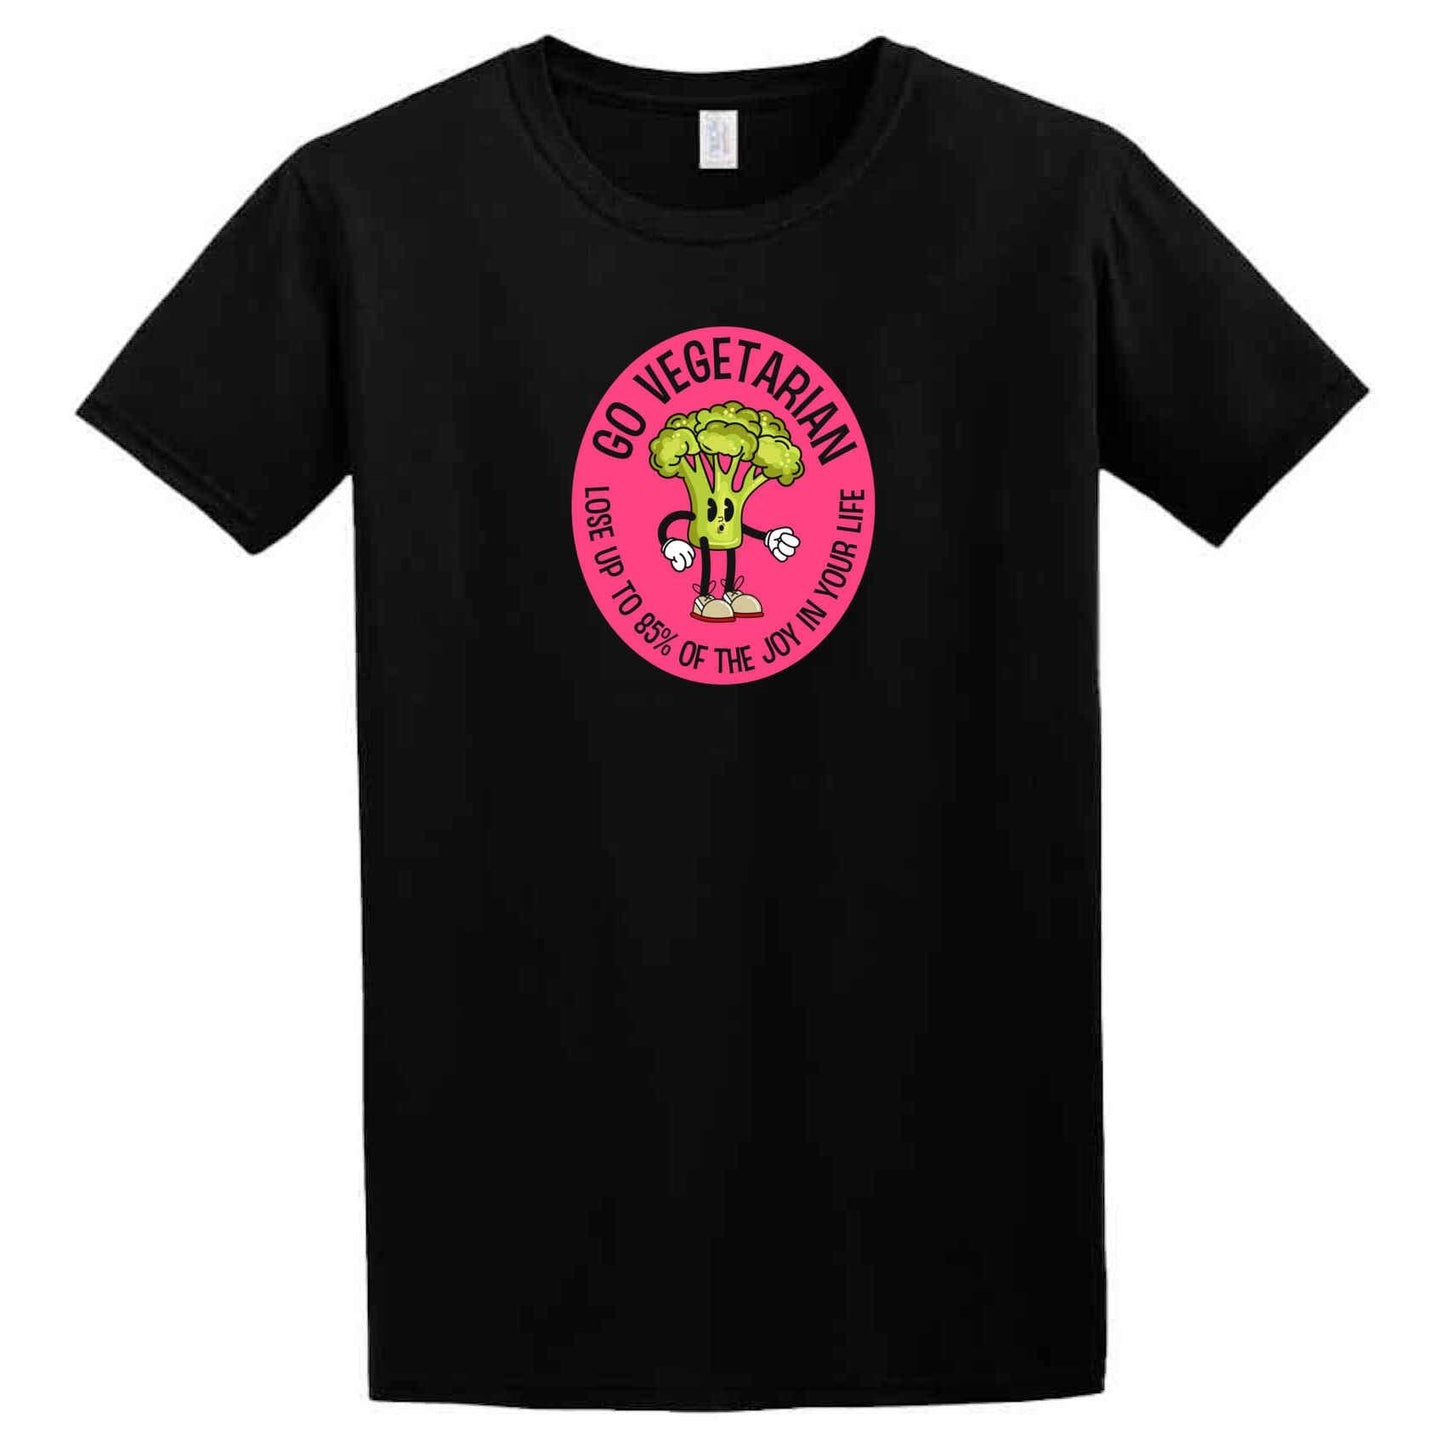 A Twisted Gifts Joy In Life T-Shirt with a pink and green logo.